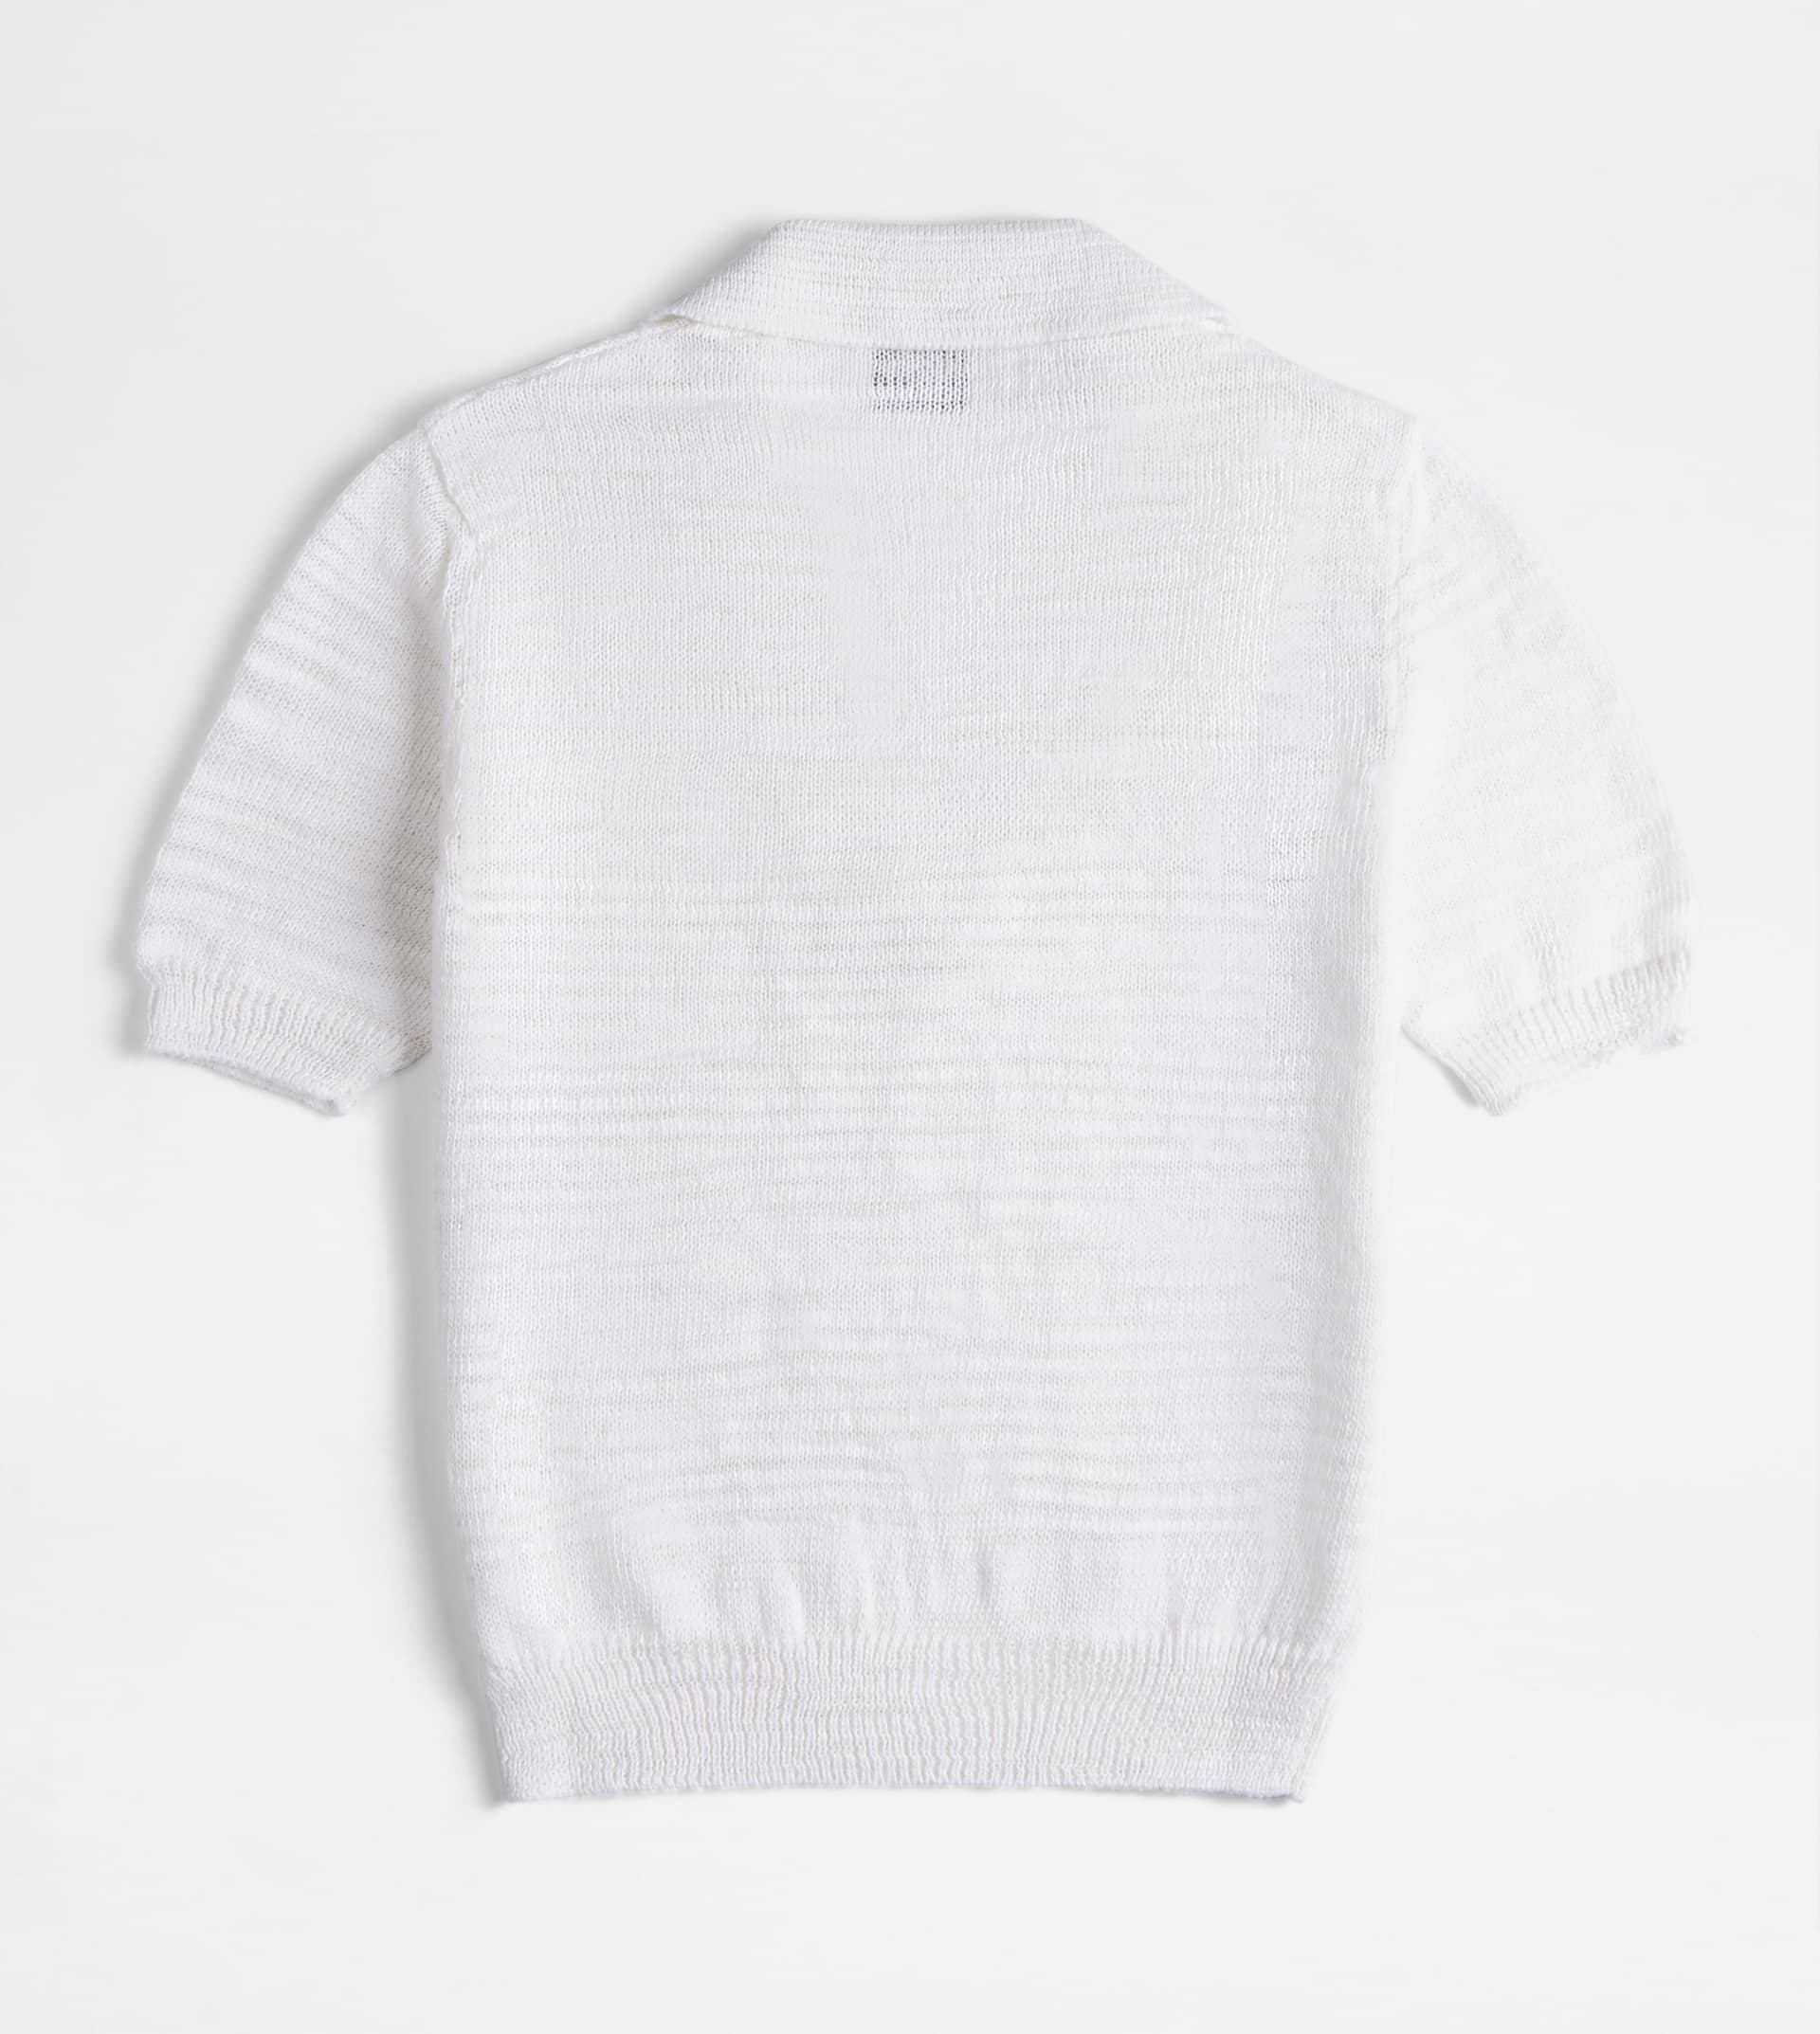 SHORT-SLEEVED POLO SHIRT IN KNIT - WHITE - 7